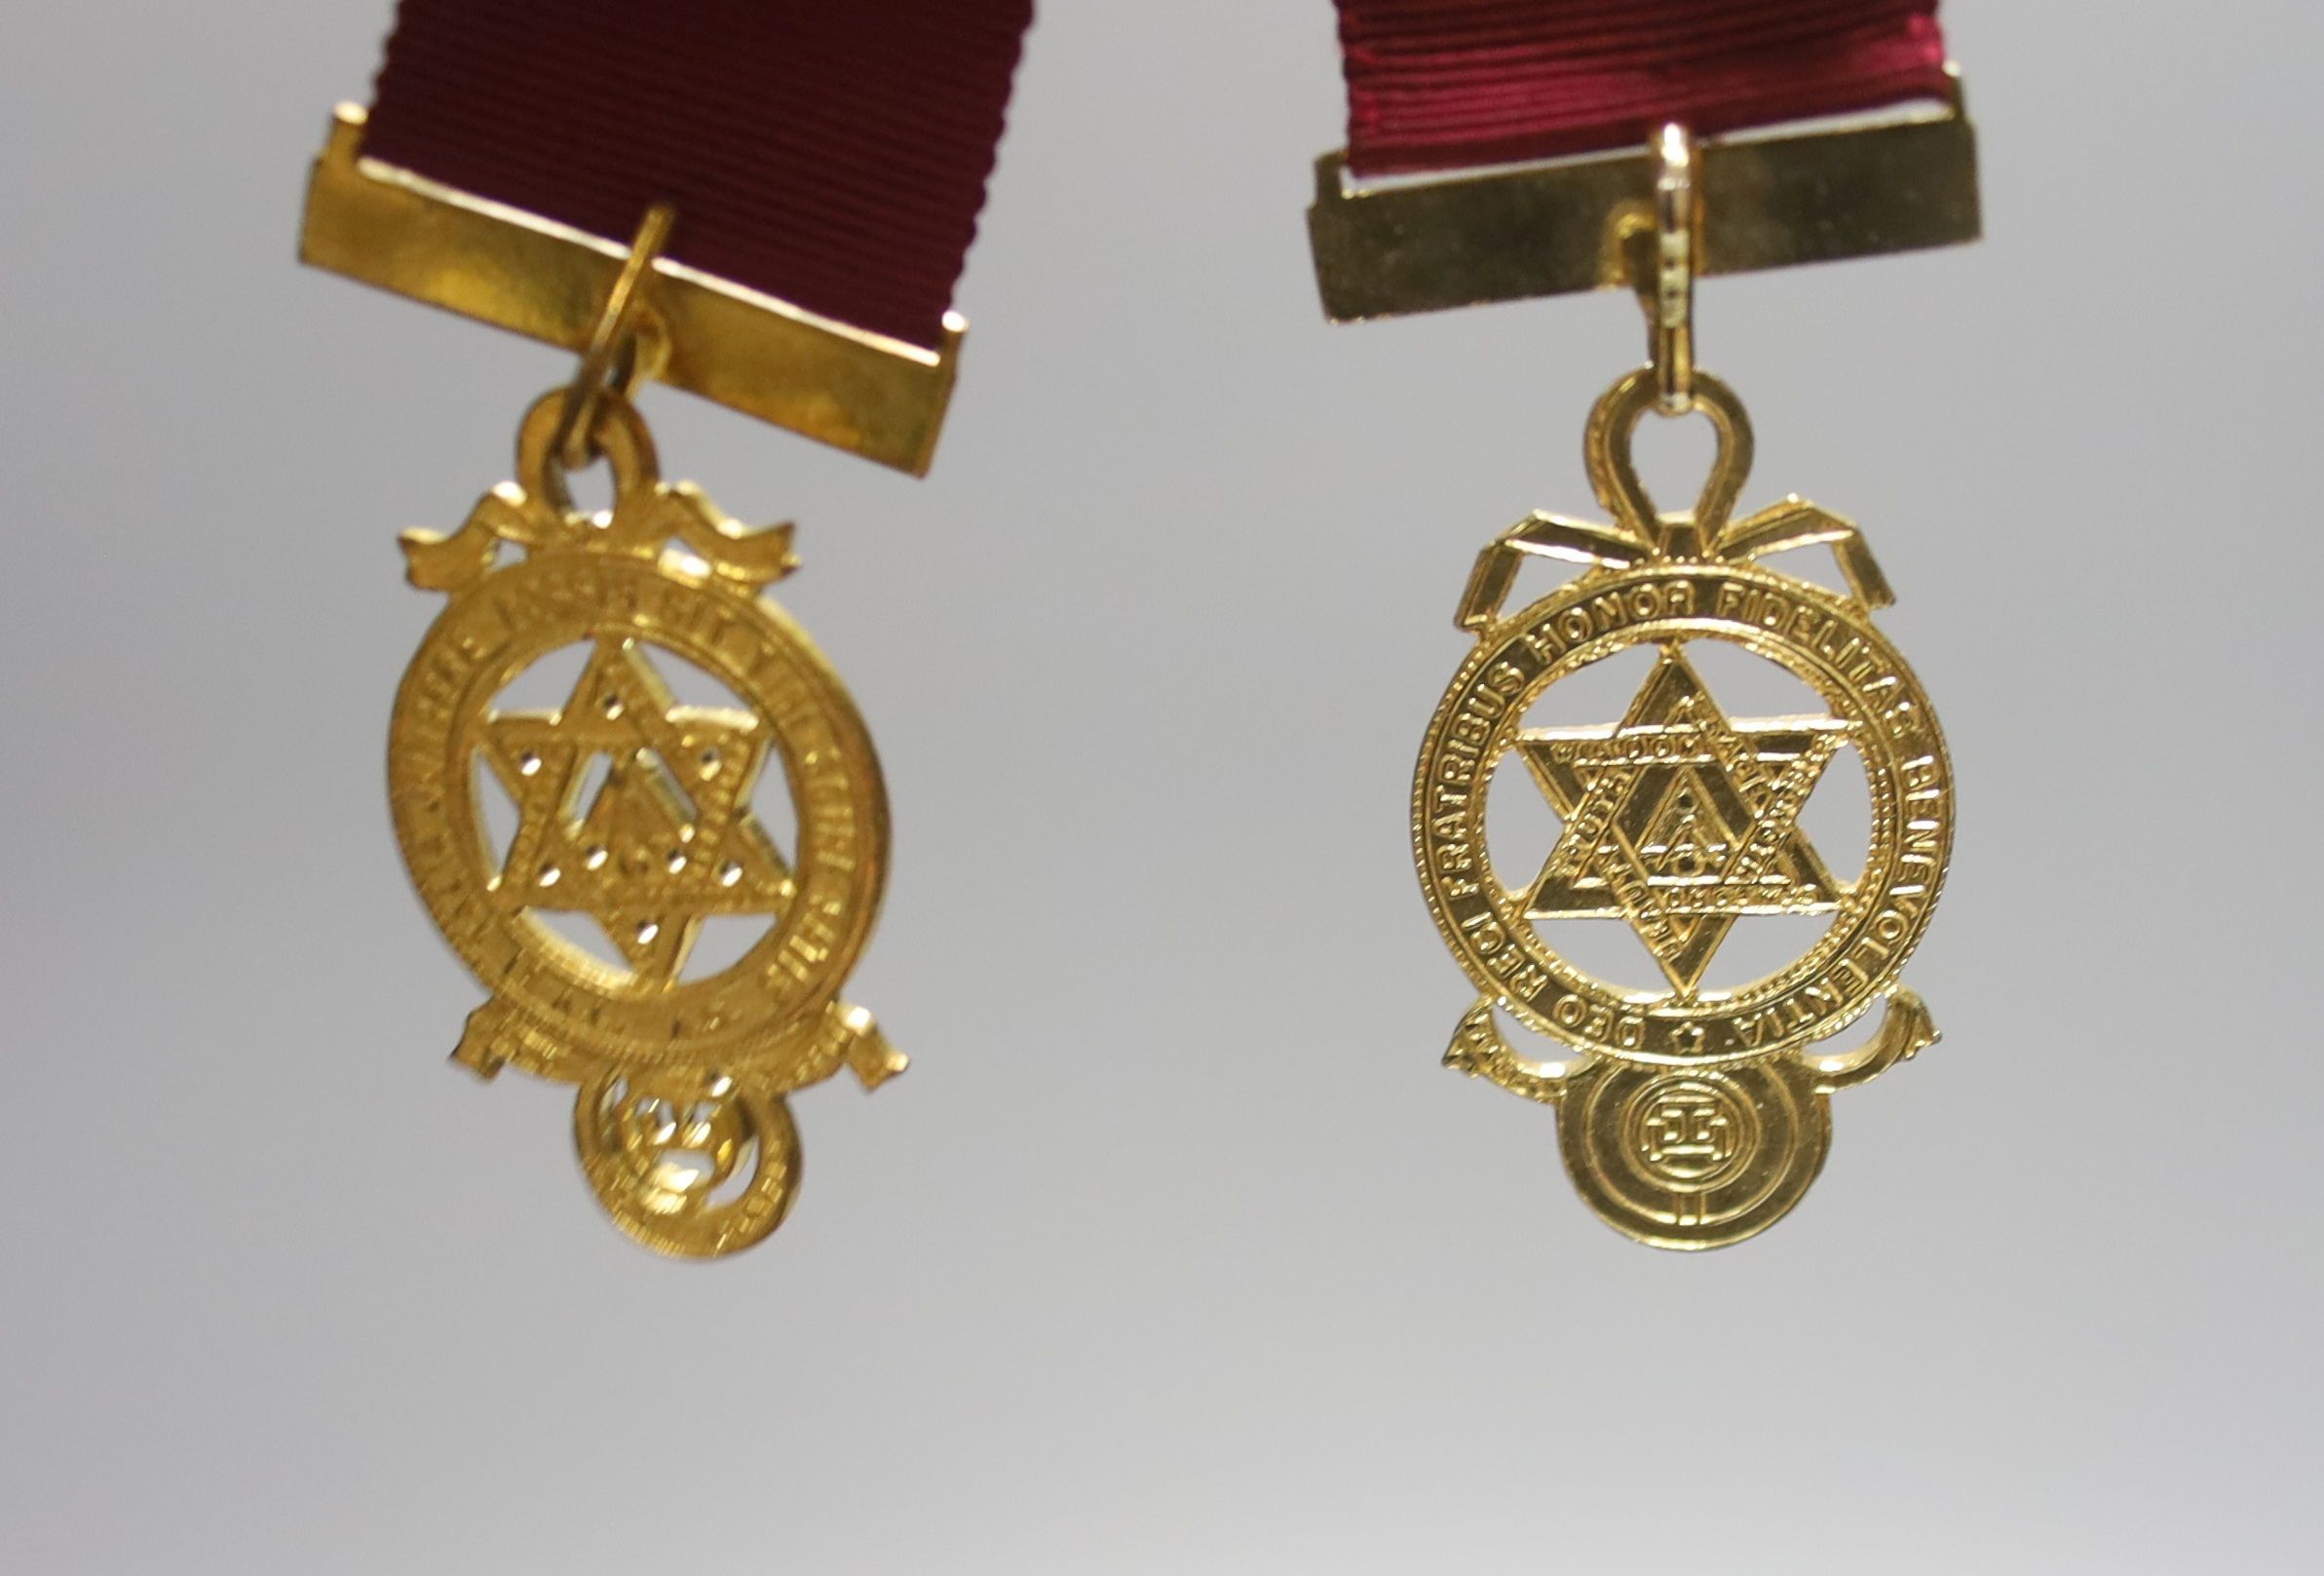 A group of Masonic sashes with metal medals and a collection of gilt metal cased medals